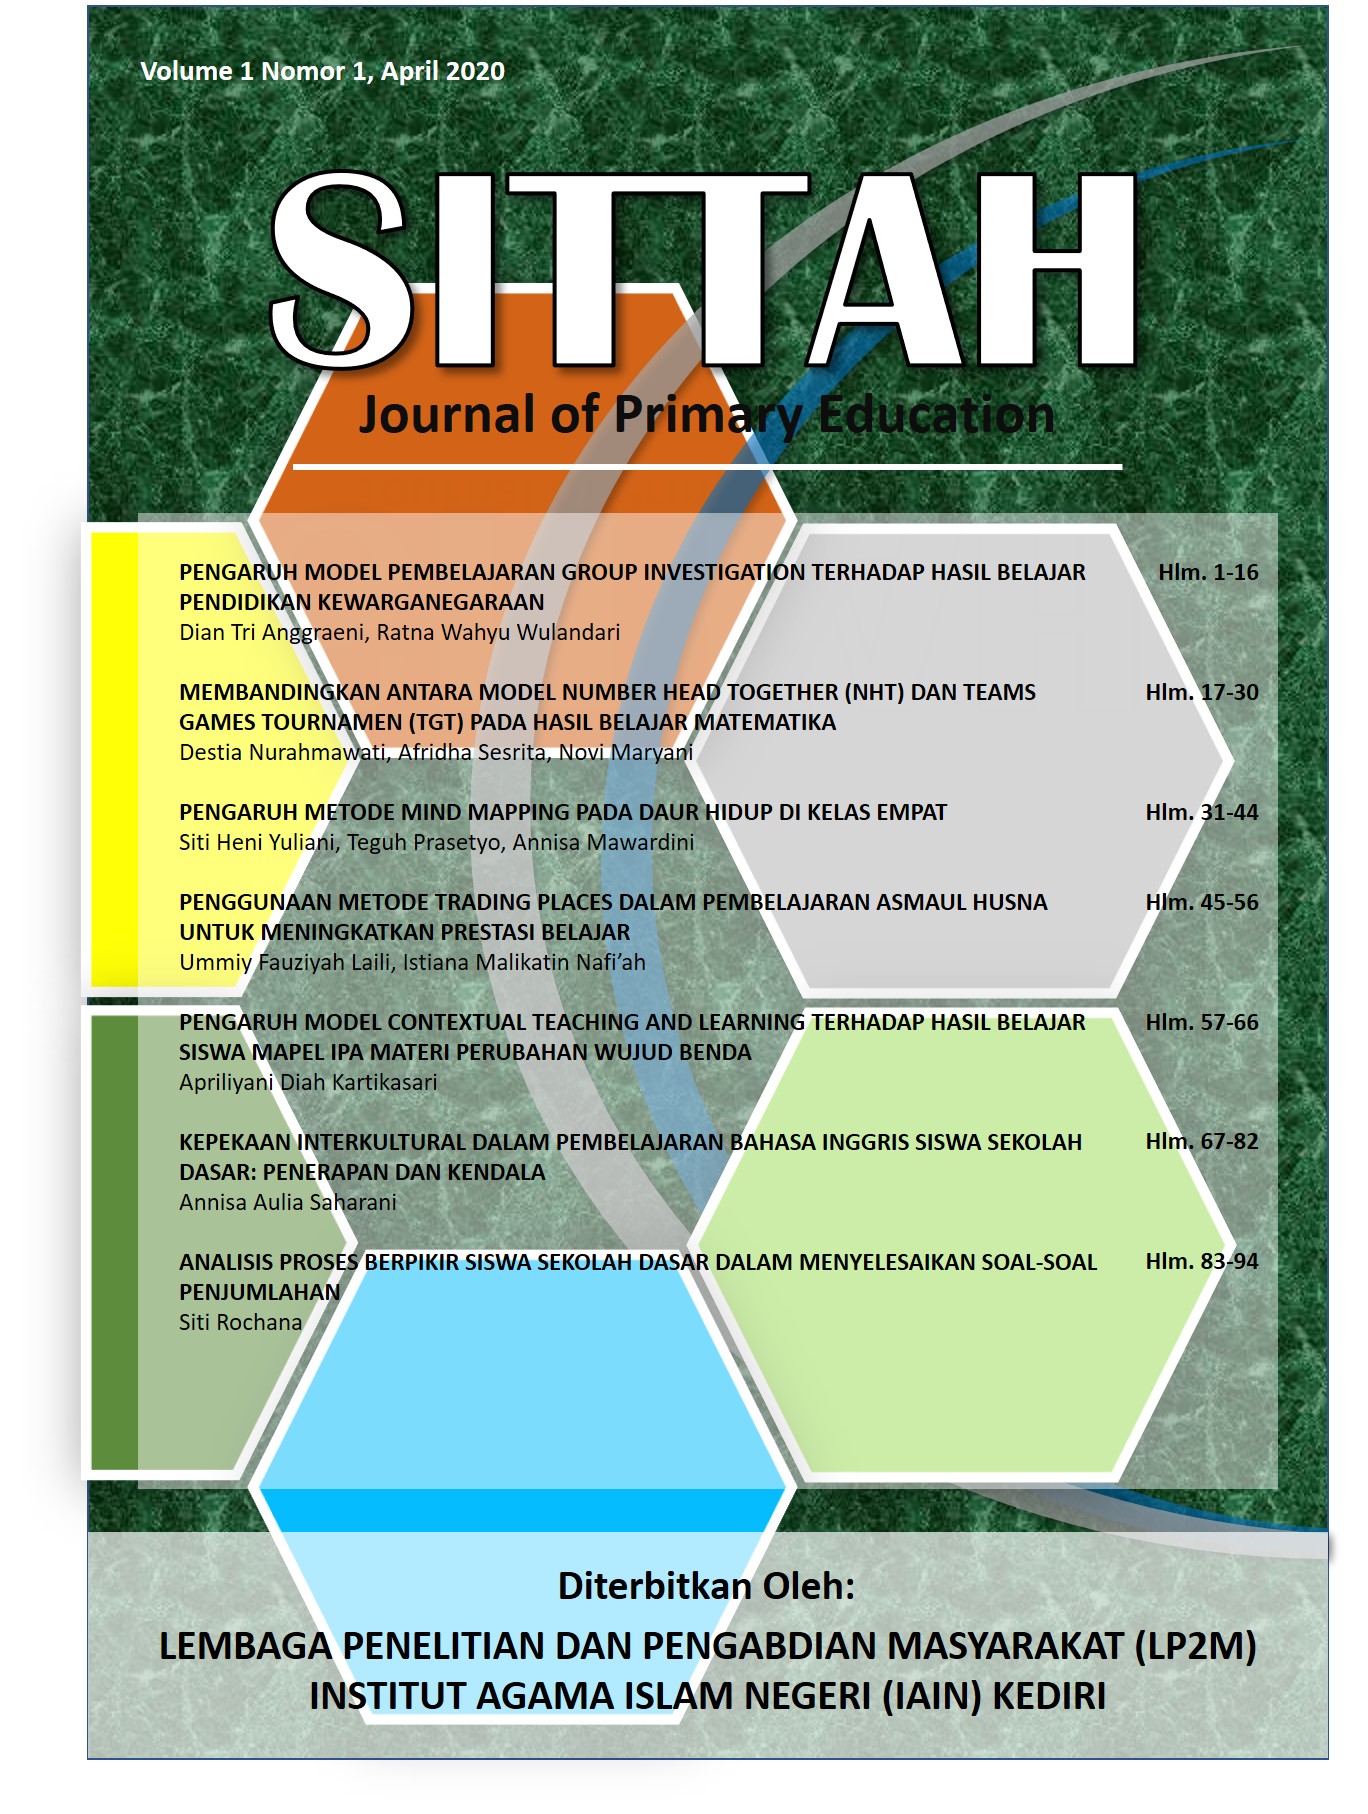 					View Vol. 1 No. 1 (2020): SITTAH: Journal of Primary Education
				